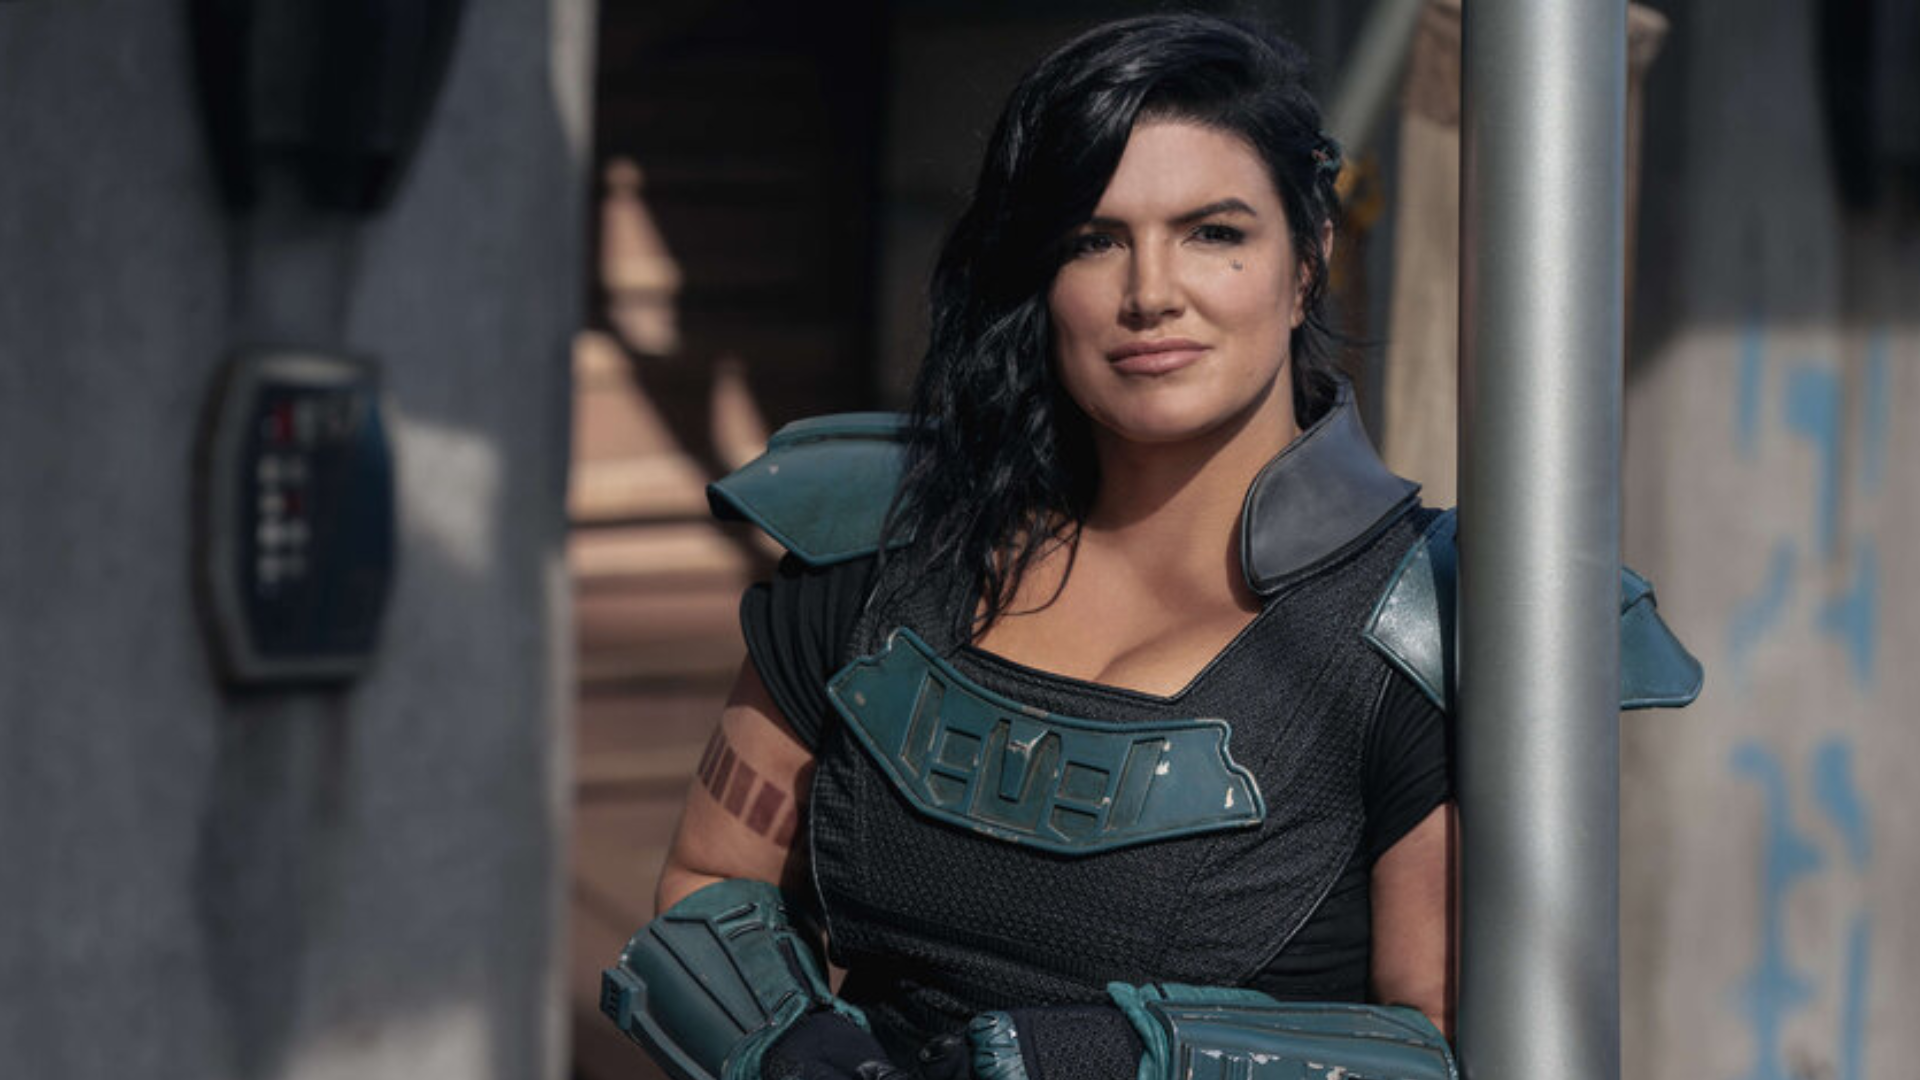 gina carano's lawsuit funded by x